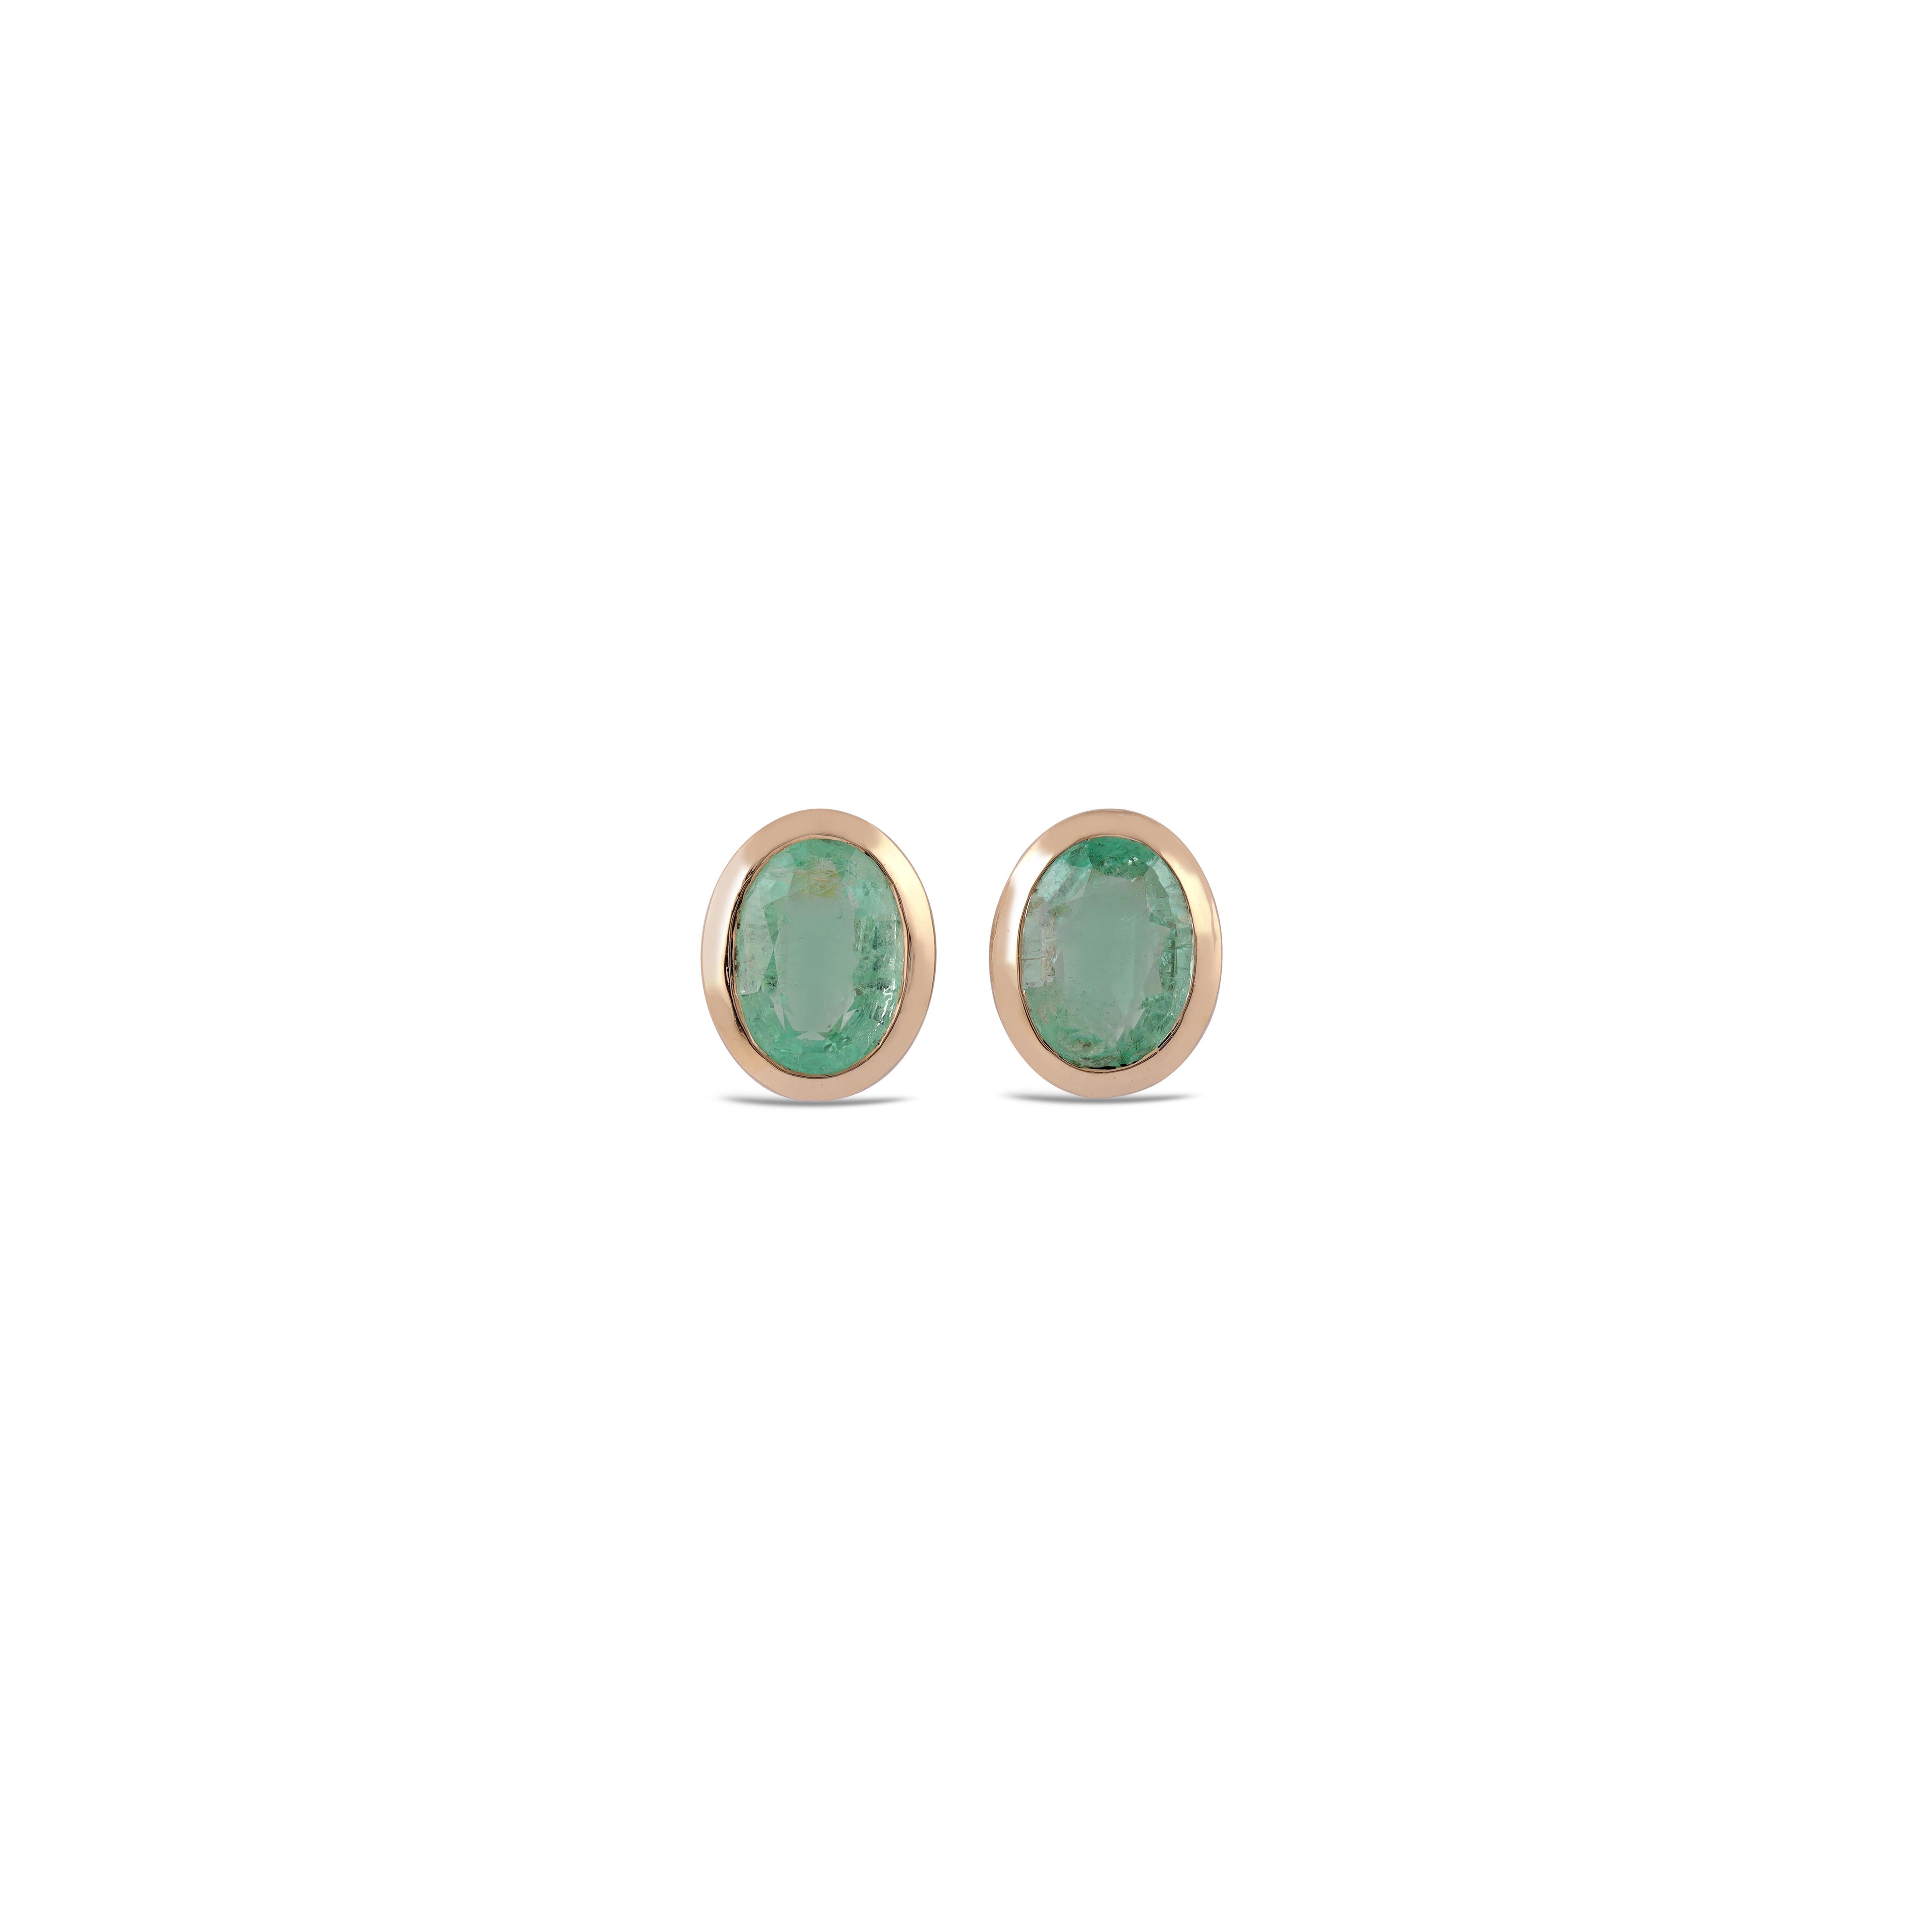 Elegant Colombian Emerald  stud earrings that are fun to wear. A classic pair of earrings with a designer touch with its Close setting in 18K Yellow gold, giving it a true Fun look.

5.43 Carat Colombian Emerald Stud Earrings in 18 Karat Rose